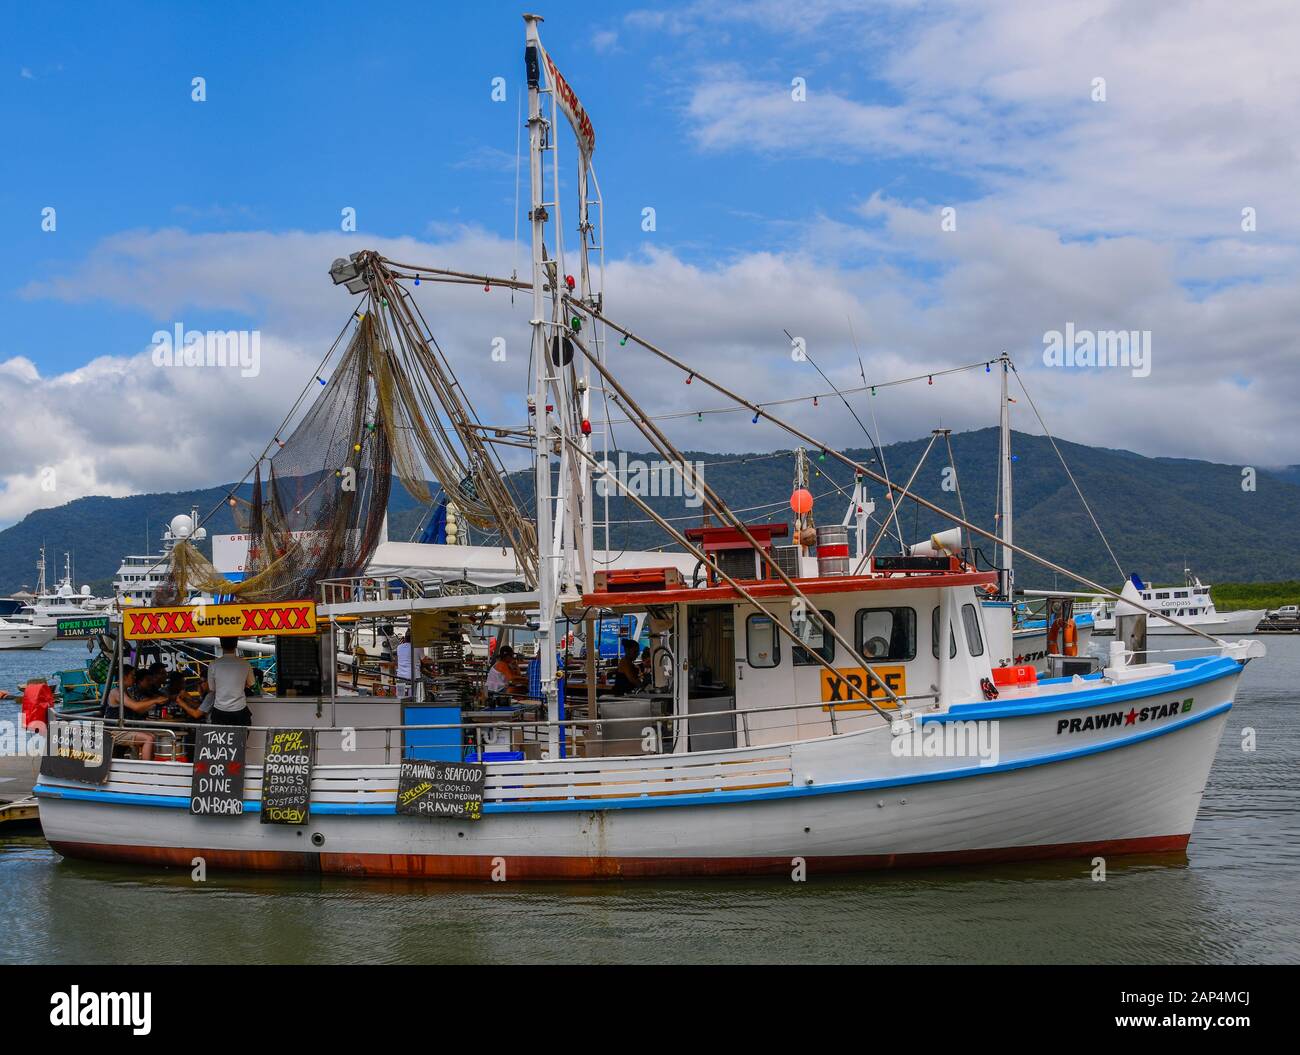 Prawn Star floating seafood restaurant trawler boat with fresh seafood offerings in Cairns Marina, Queensland, Australia Stock Photo